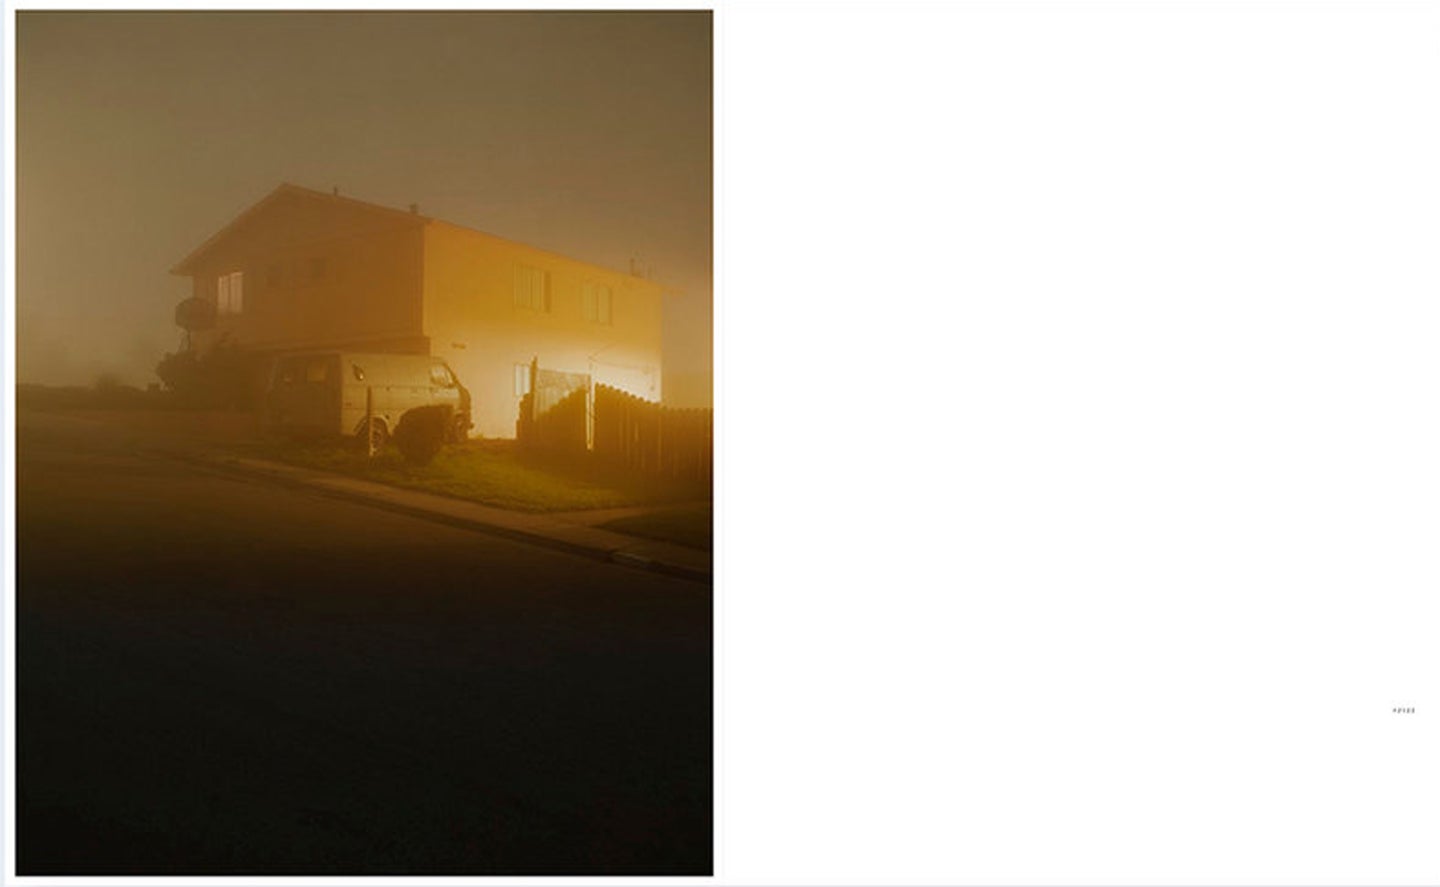 Todd Hido: House Hunting (Remastered Third Edition), Deluxe Limited Edition of 25 (with Print) [SIGNED & NUMBERED]